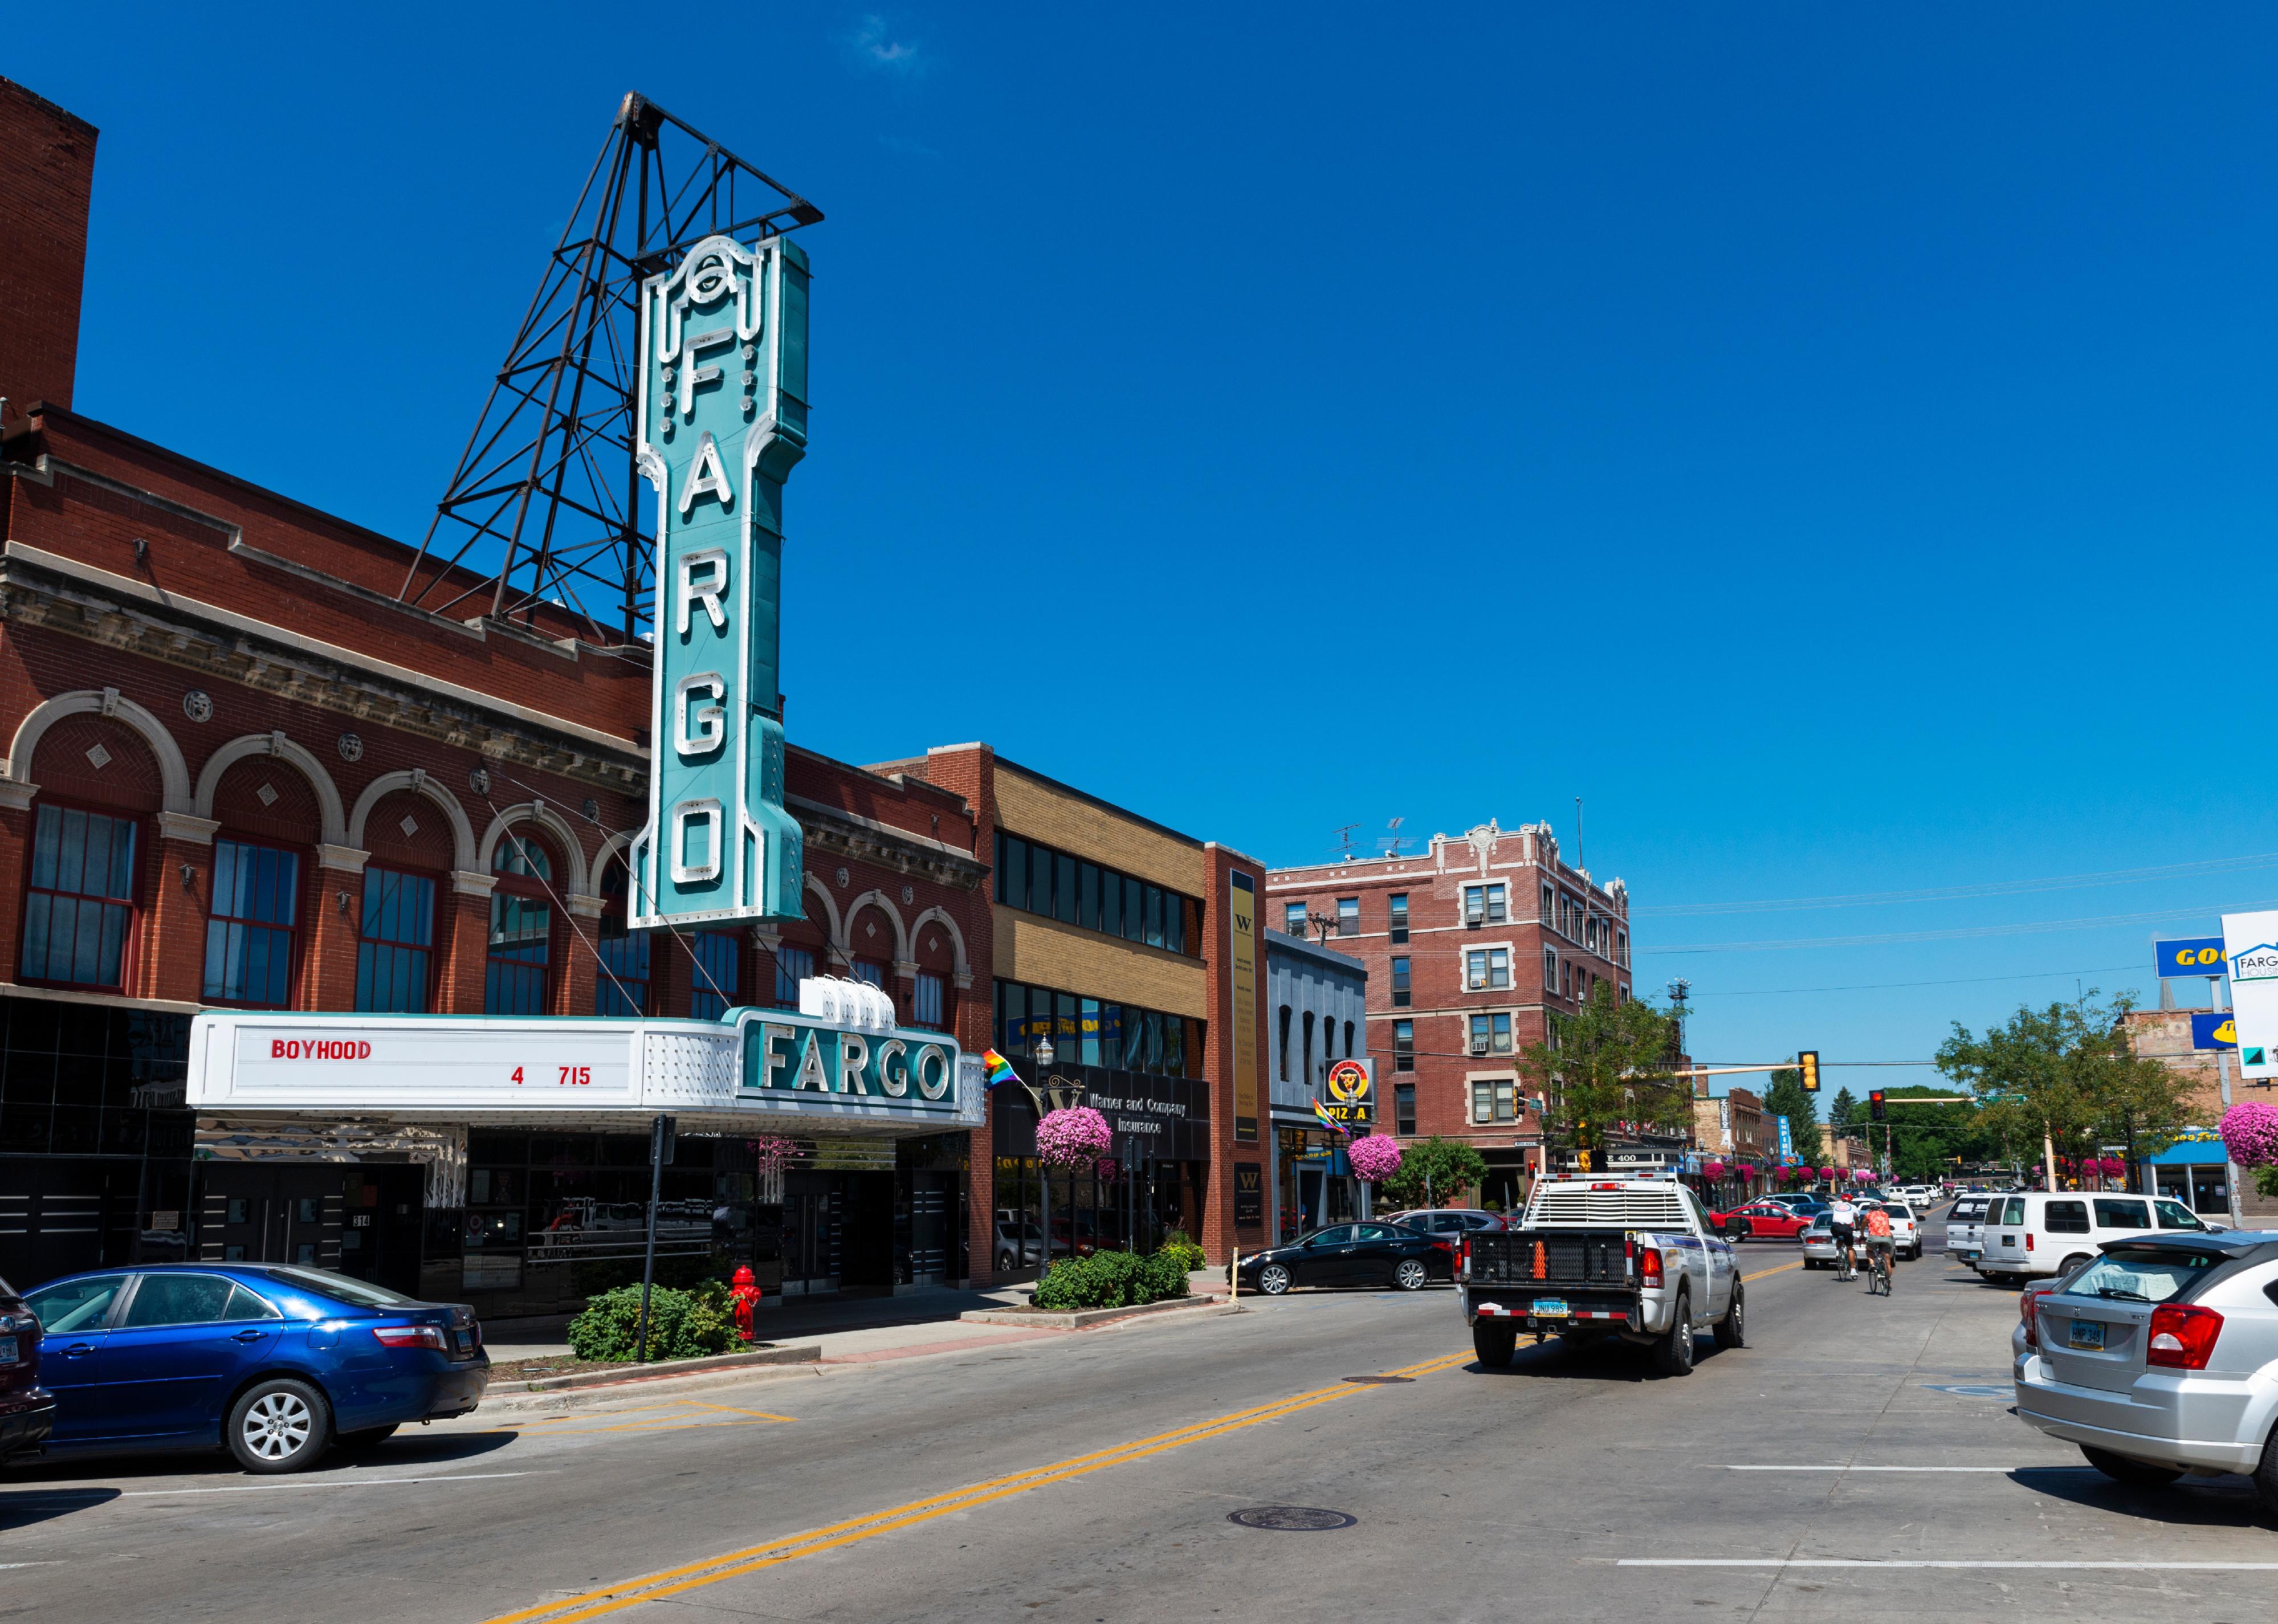 View of the broadway street with the facade of the Fargo Theatre